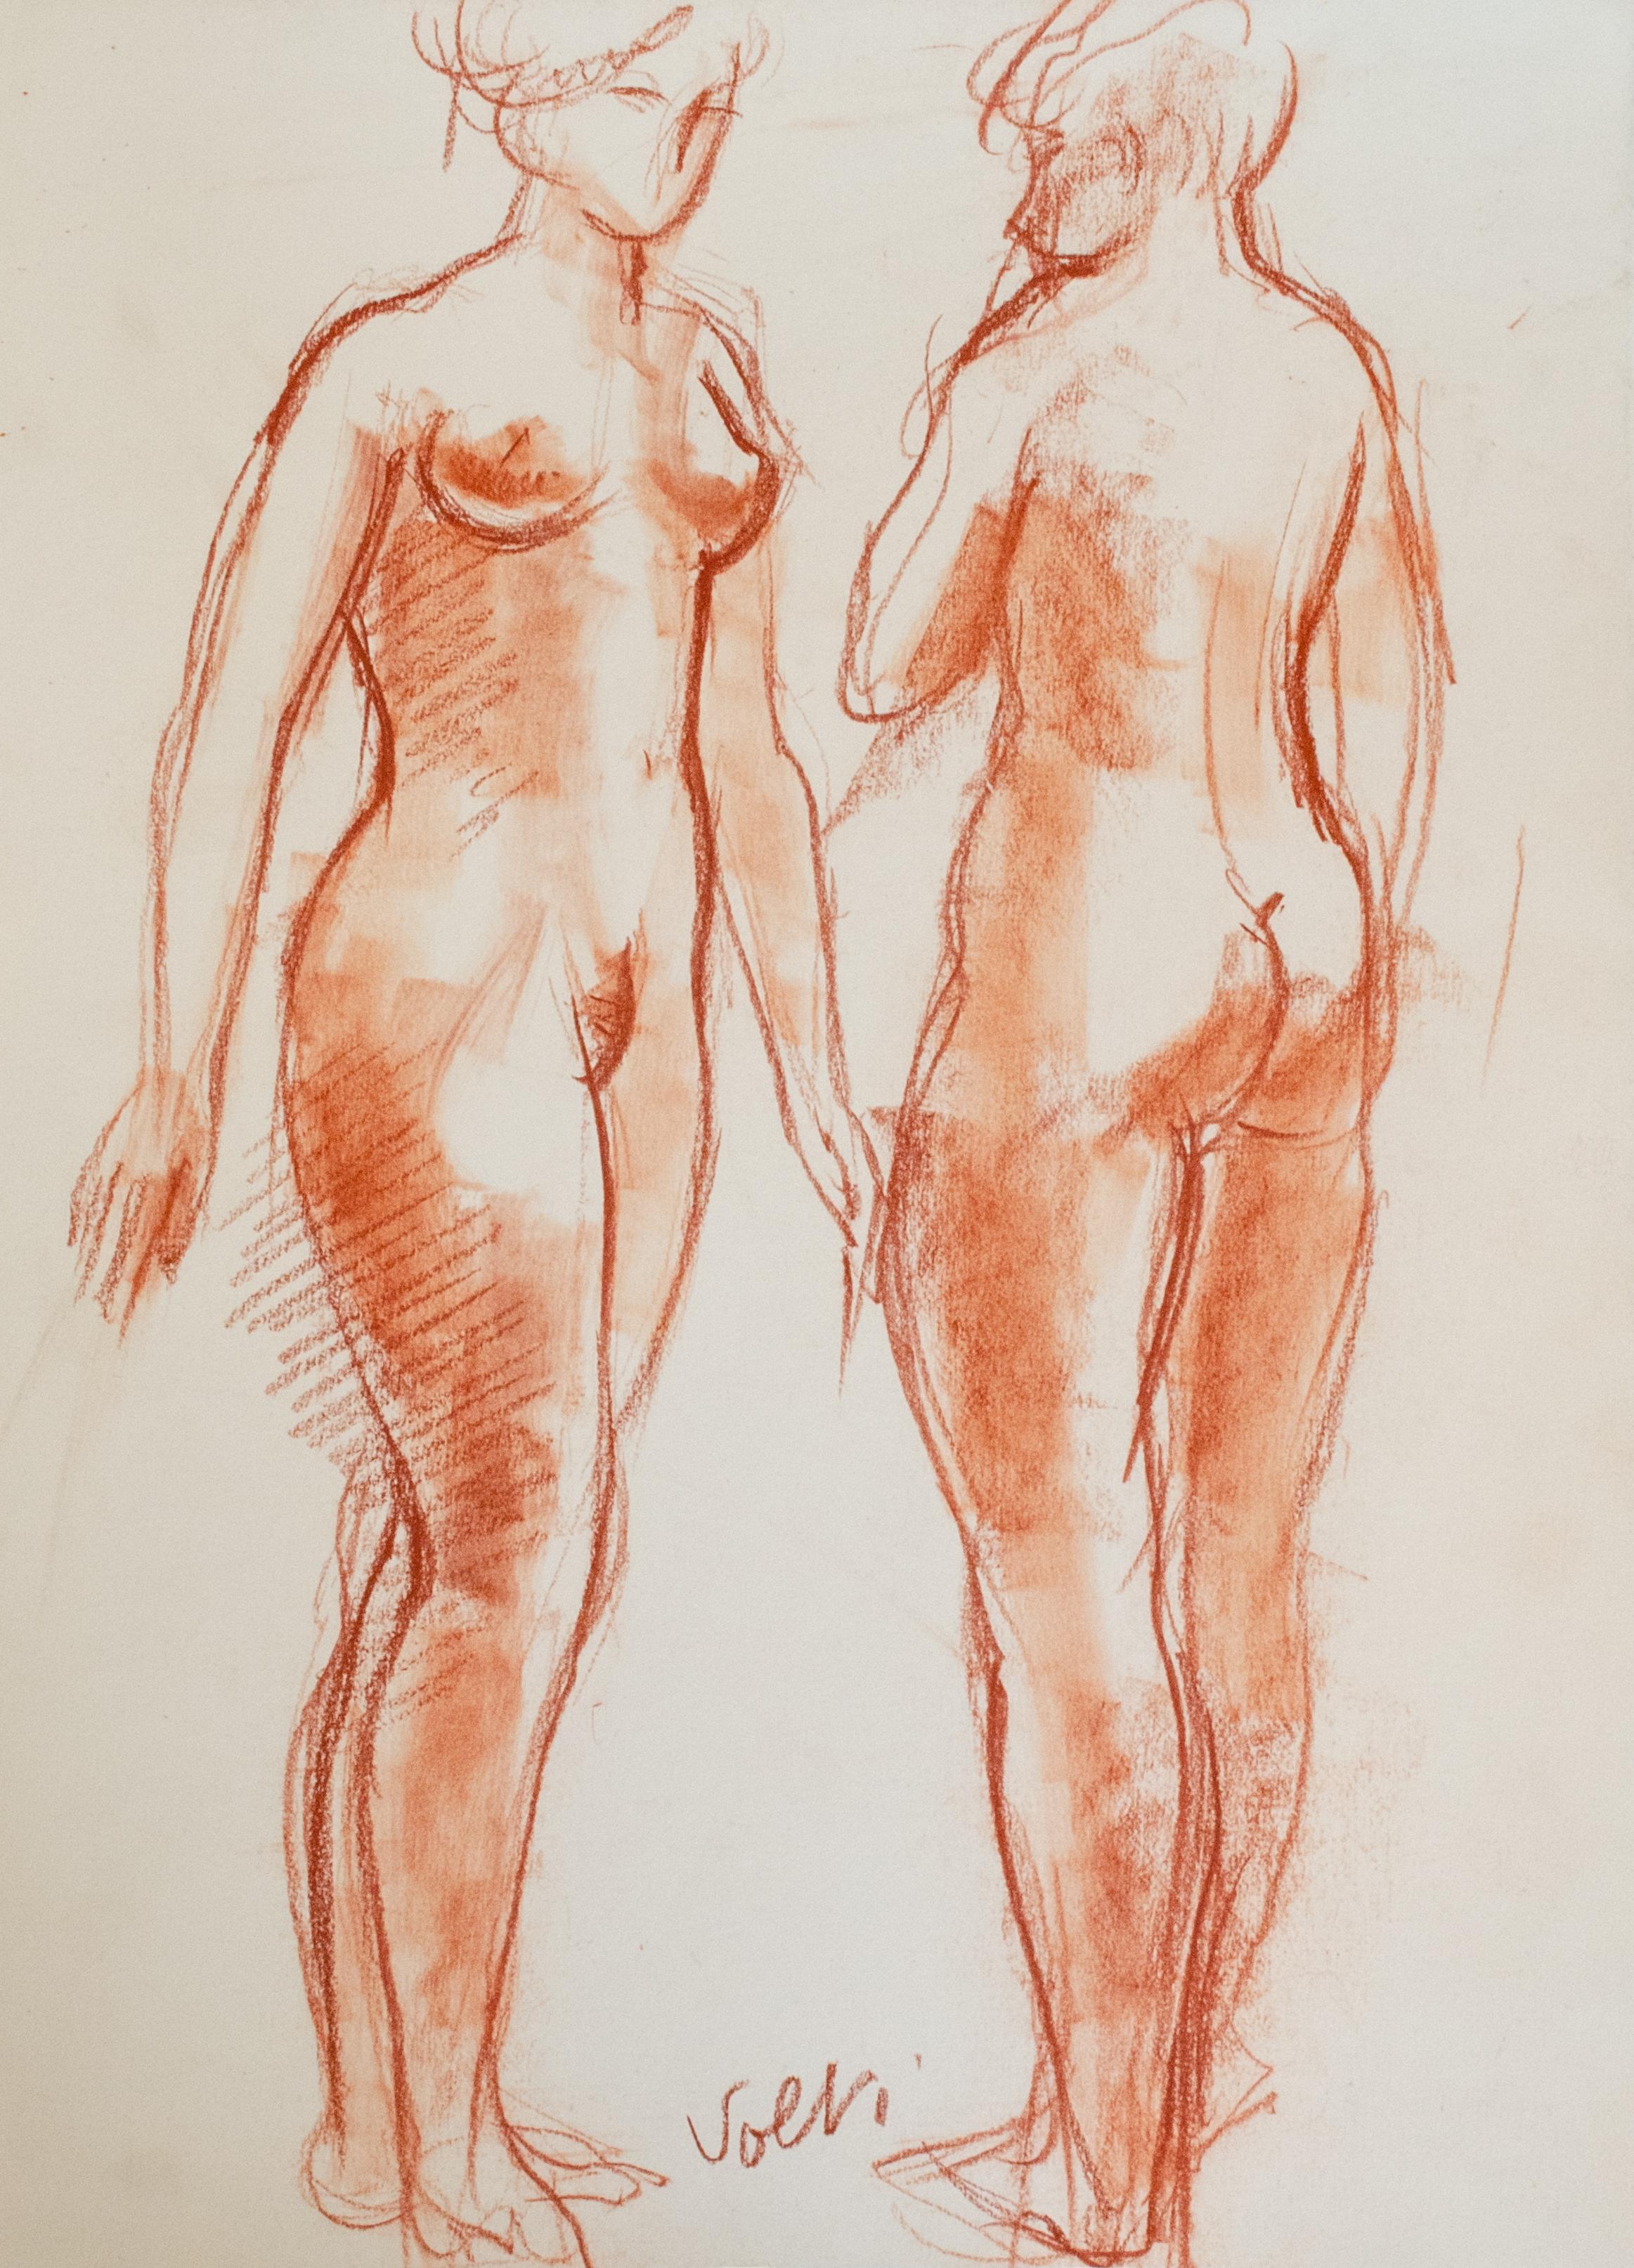 Antoniucci Volti (French, 1915-1989)
Untitled, 1969
Red chalk on paper
14 3/4 x 11 in. 
Signed: Volti

Sculptor, painter, and printmaker Antoniucci Volti was born in Albano, Italy, in 1915. His family lived in there until 1920 when the family moved